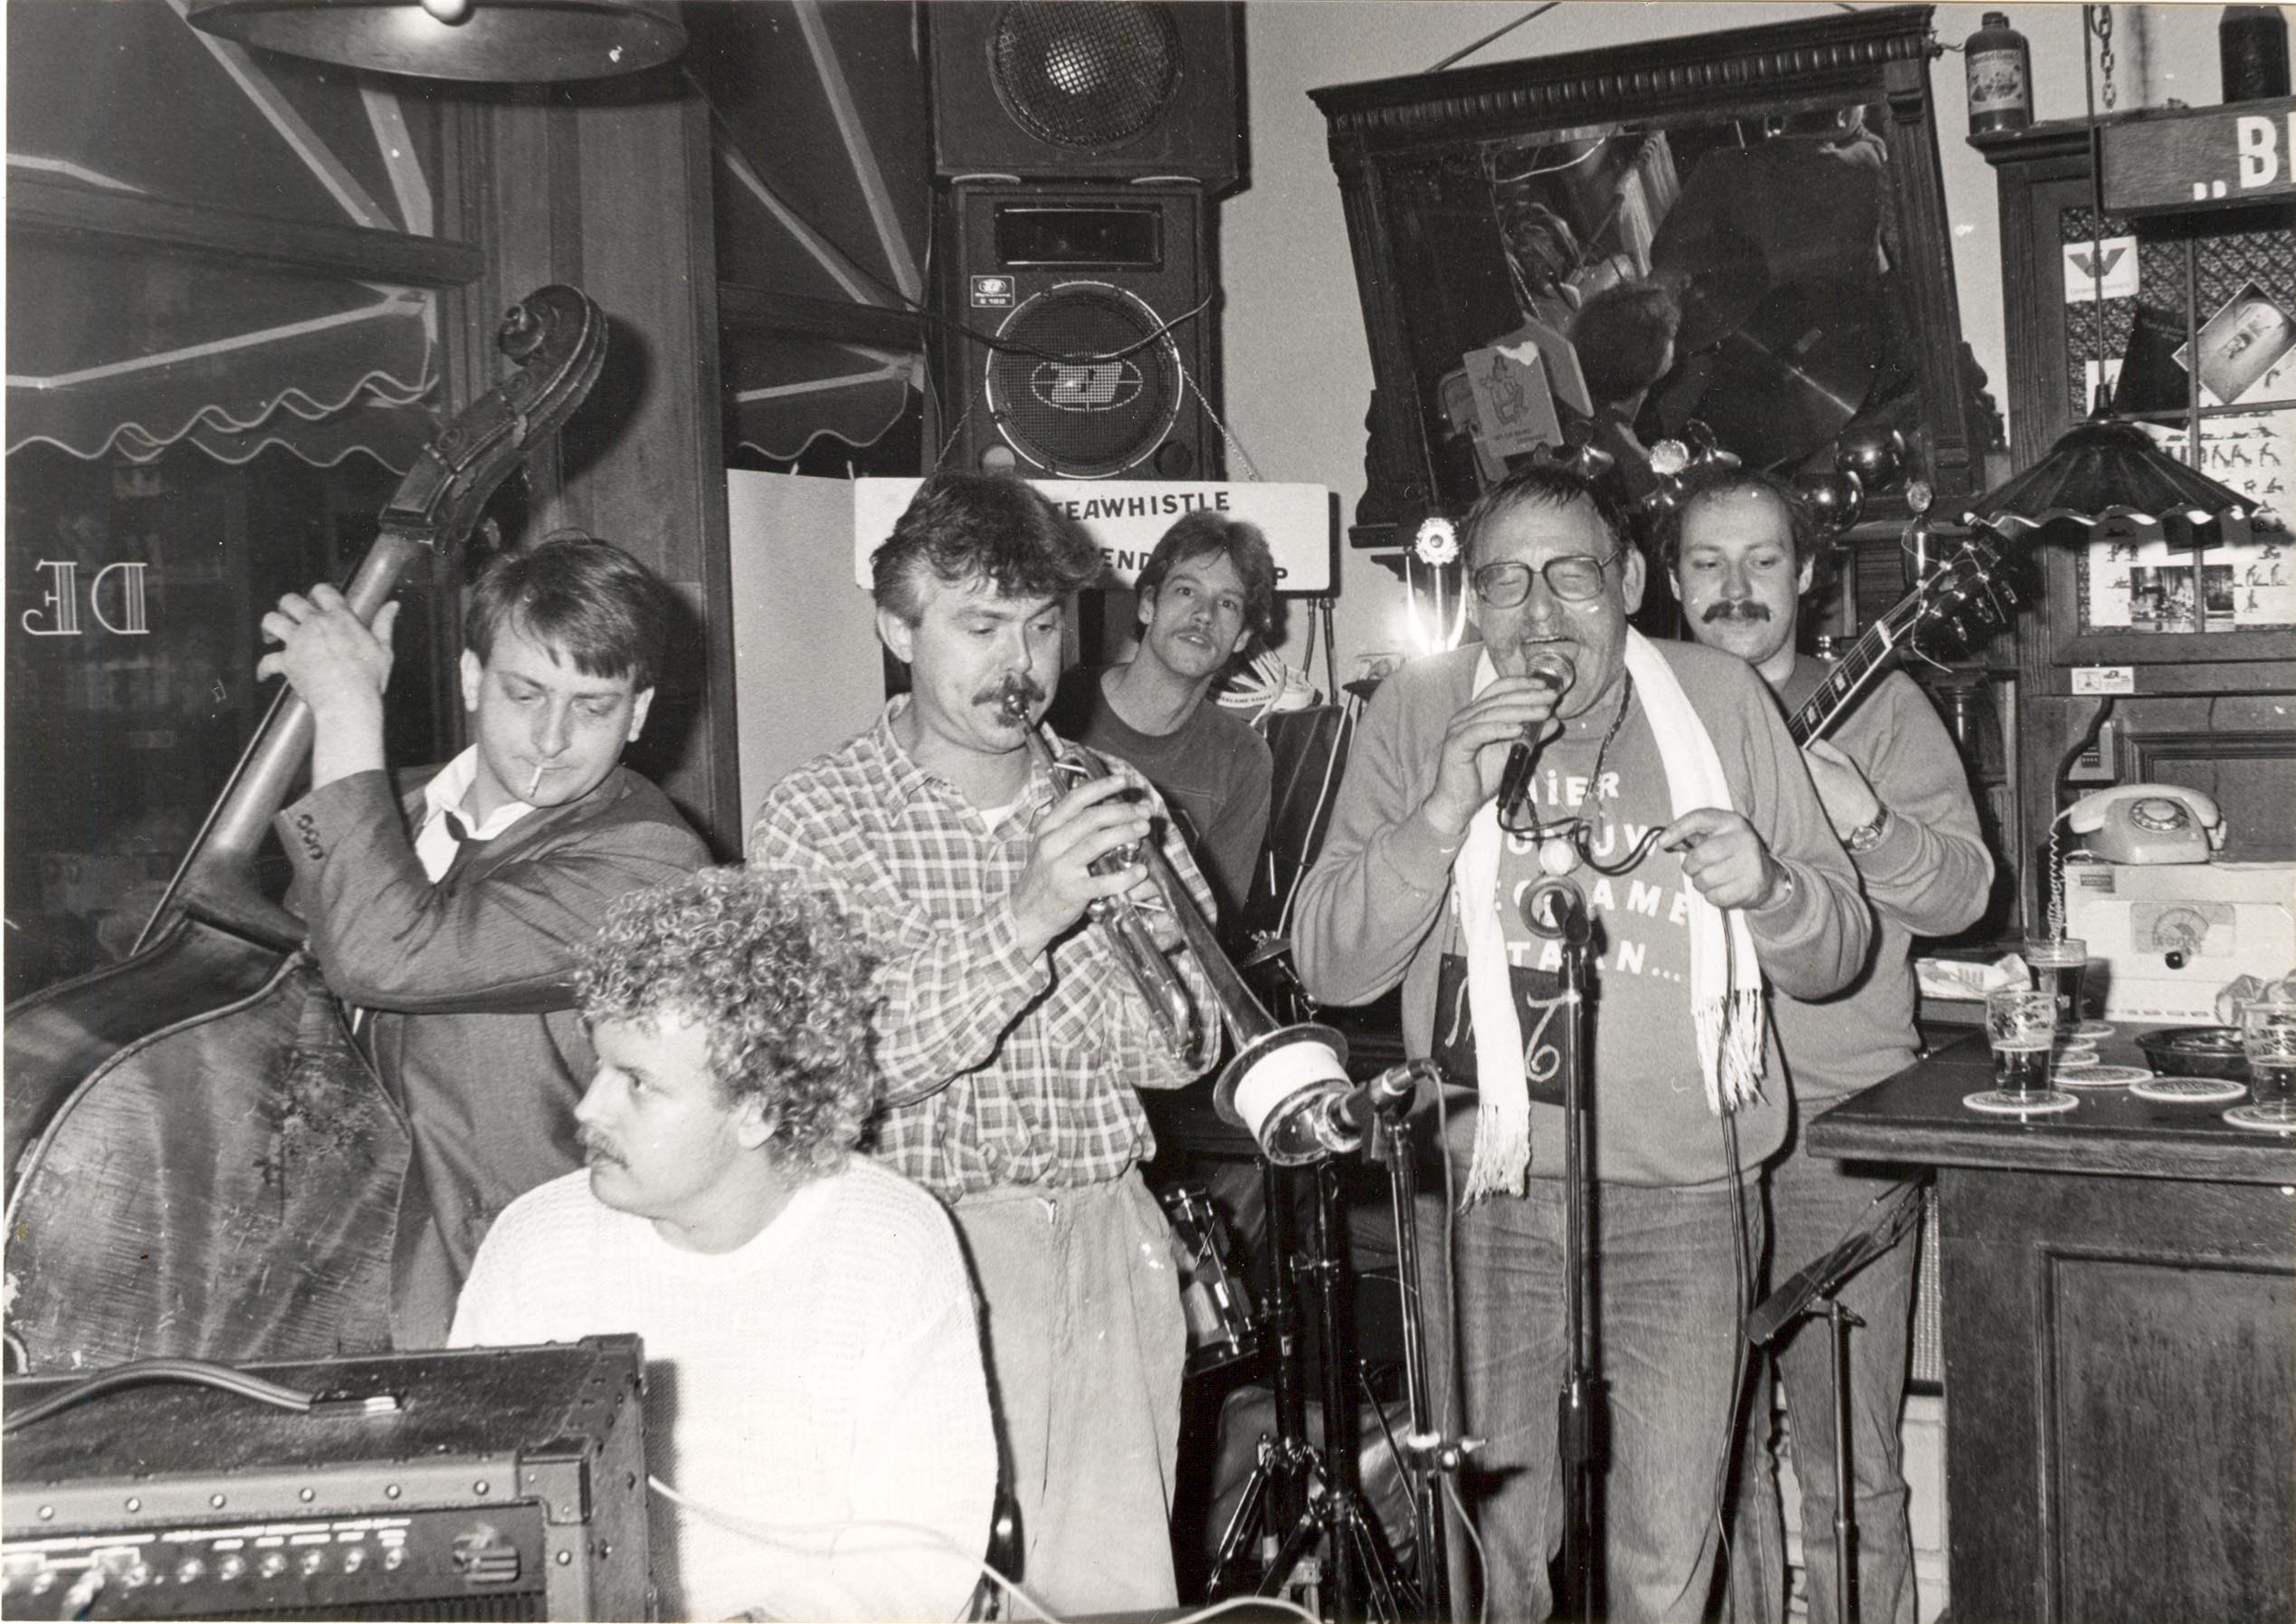 12. Max Teawhistle & the Friends of Bop in Amsterdam ong. '85